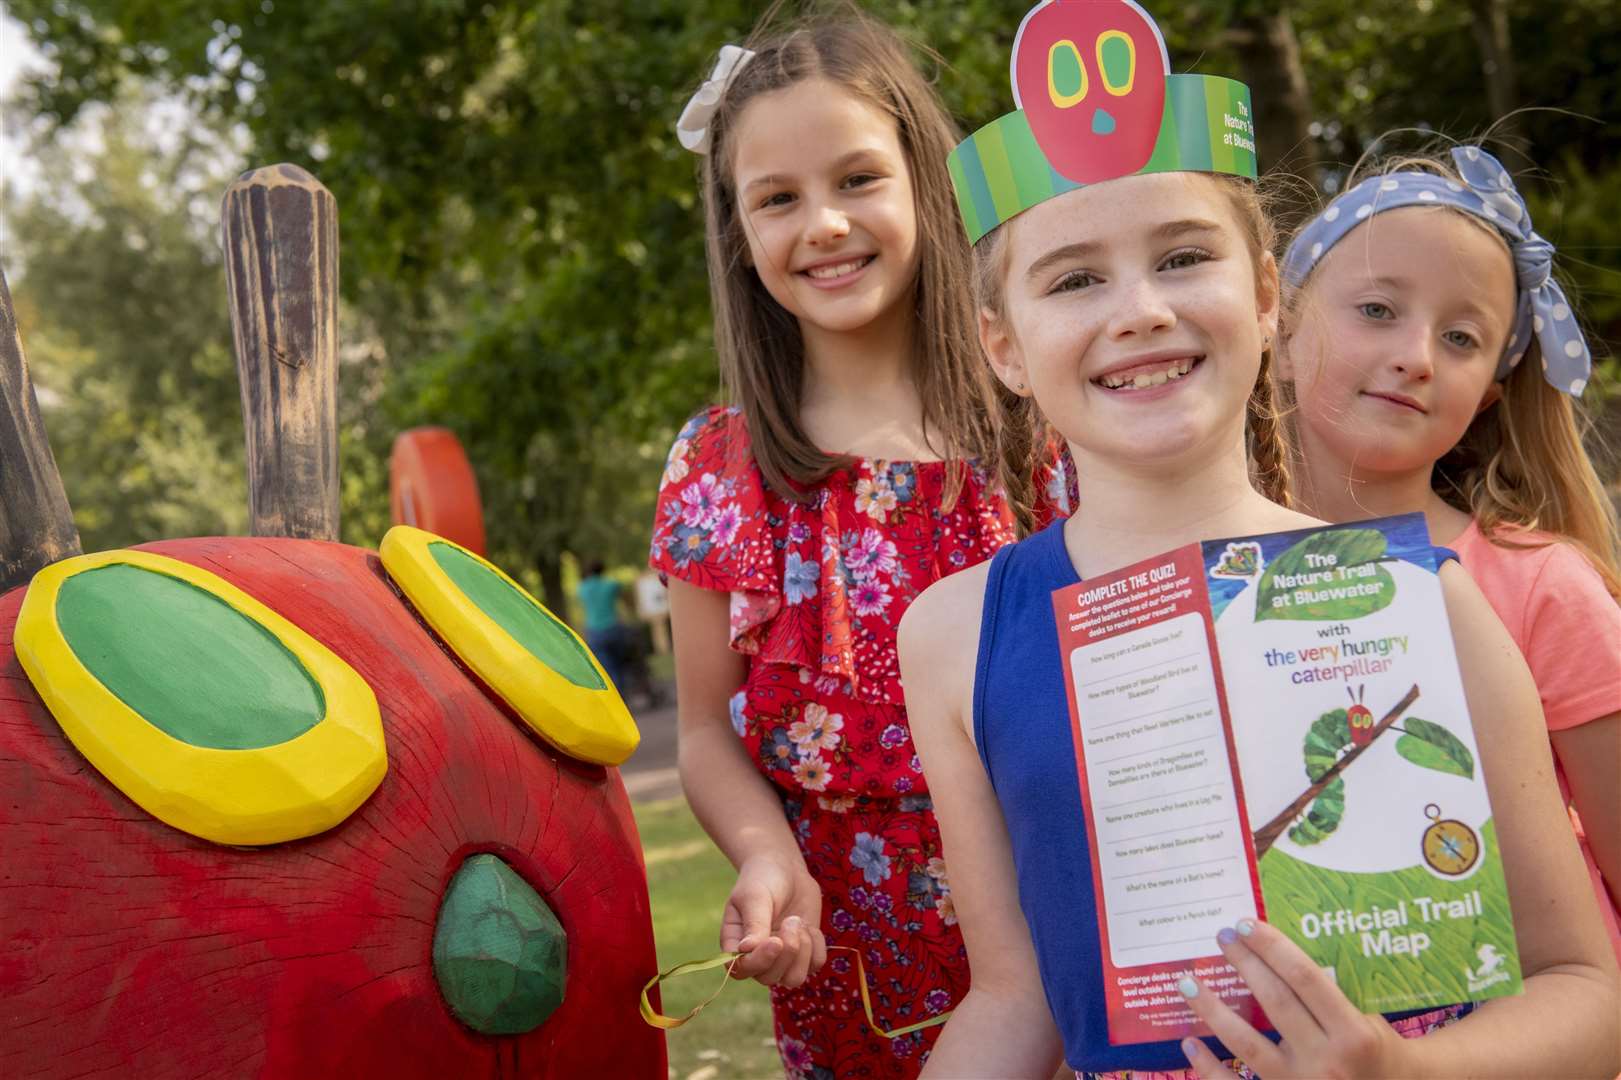 Bluewater's Nature Trail is now in patrnership with the Hungry Caterpillar